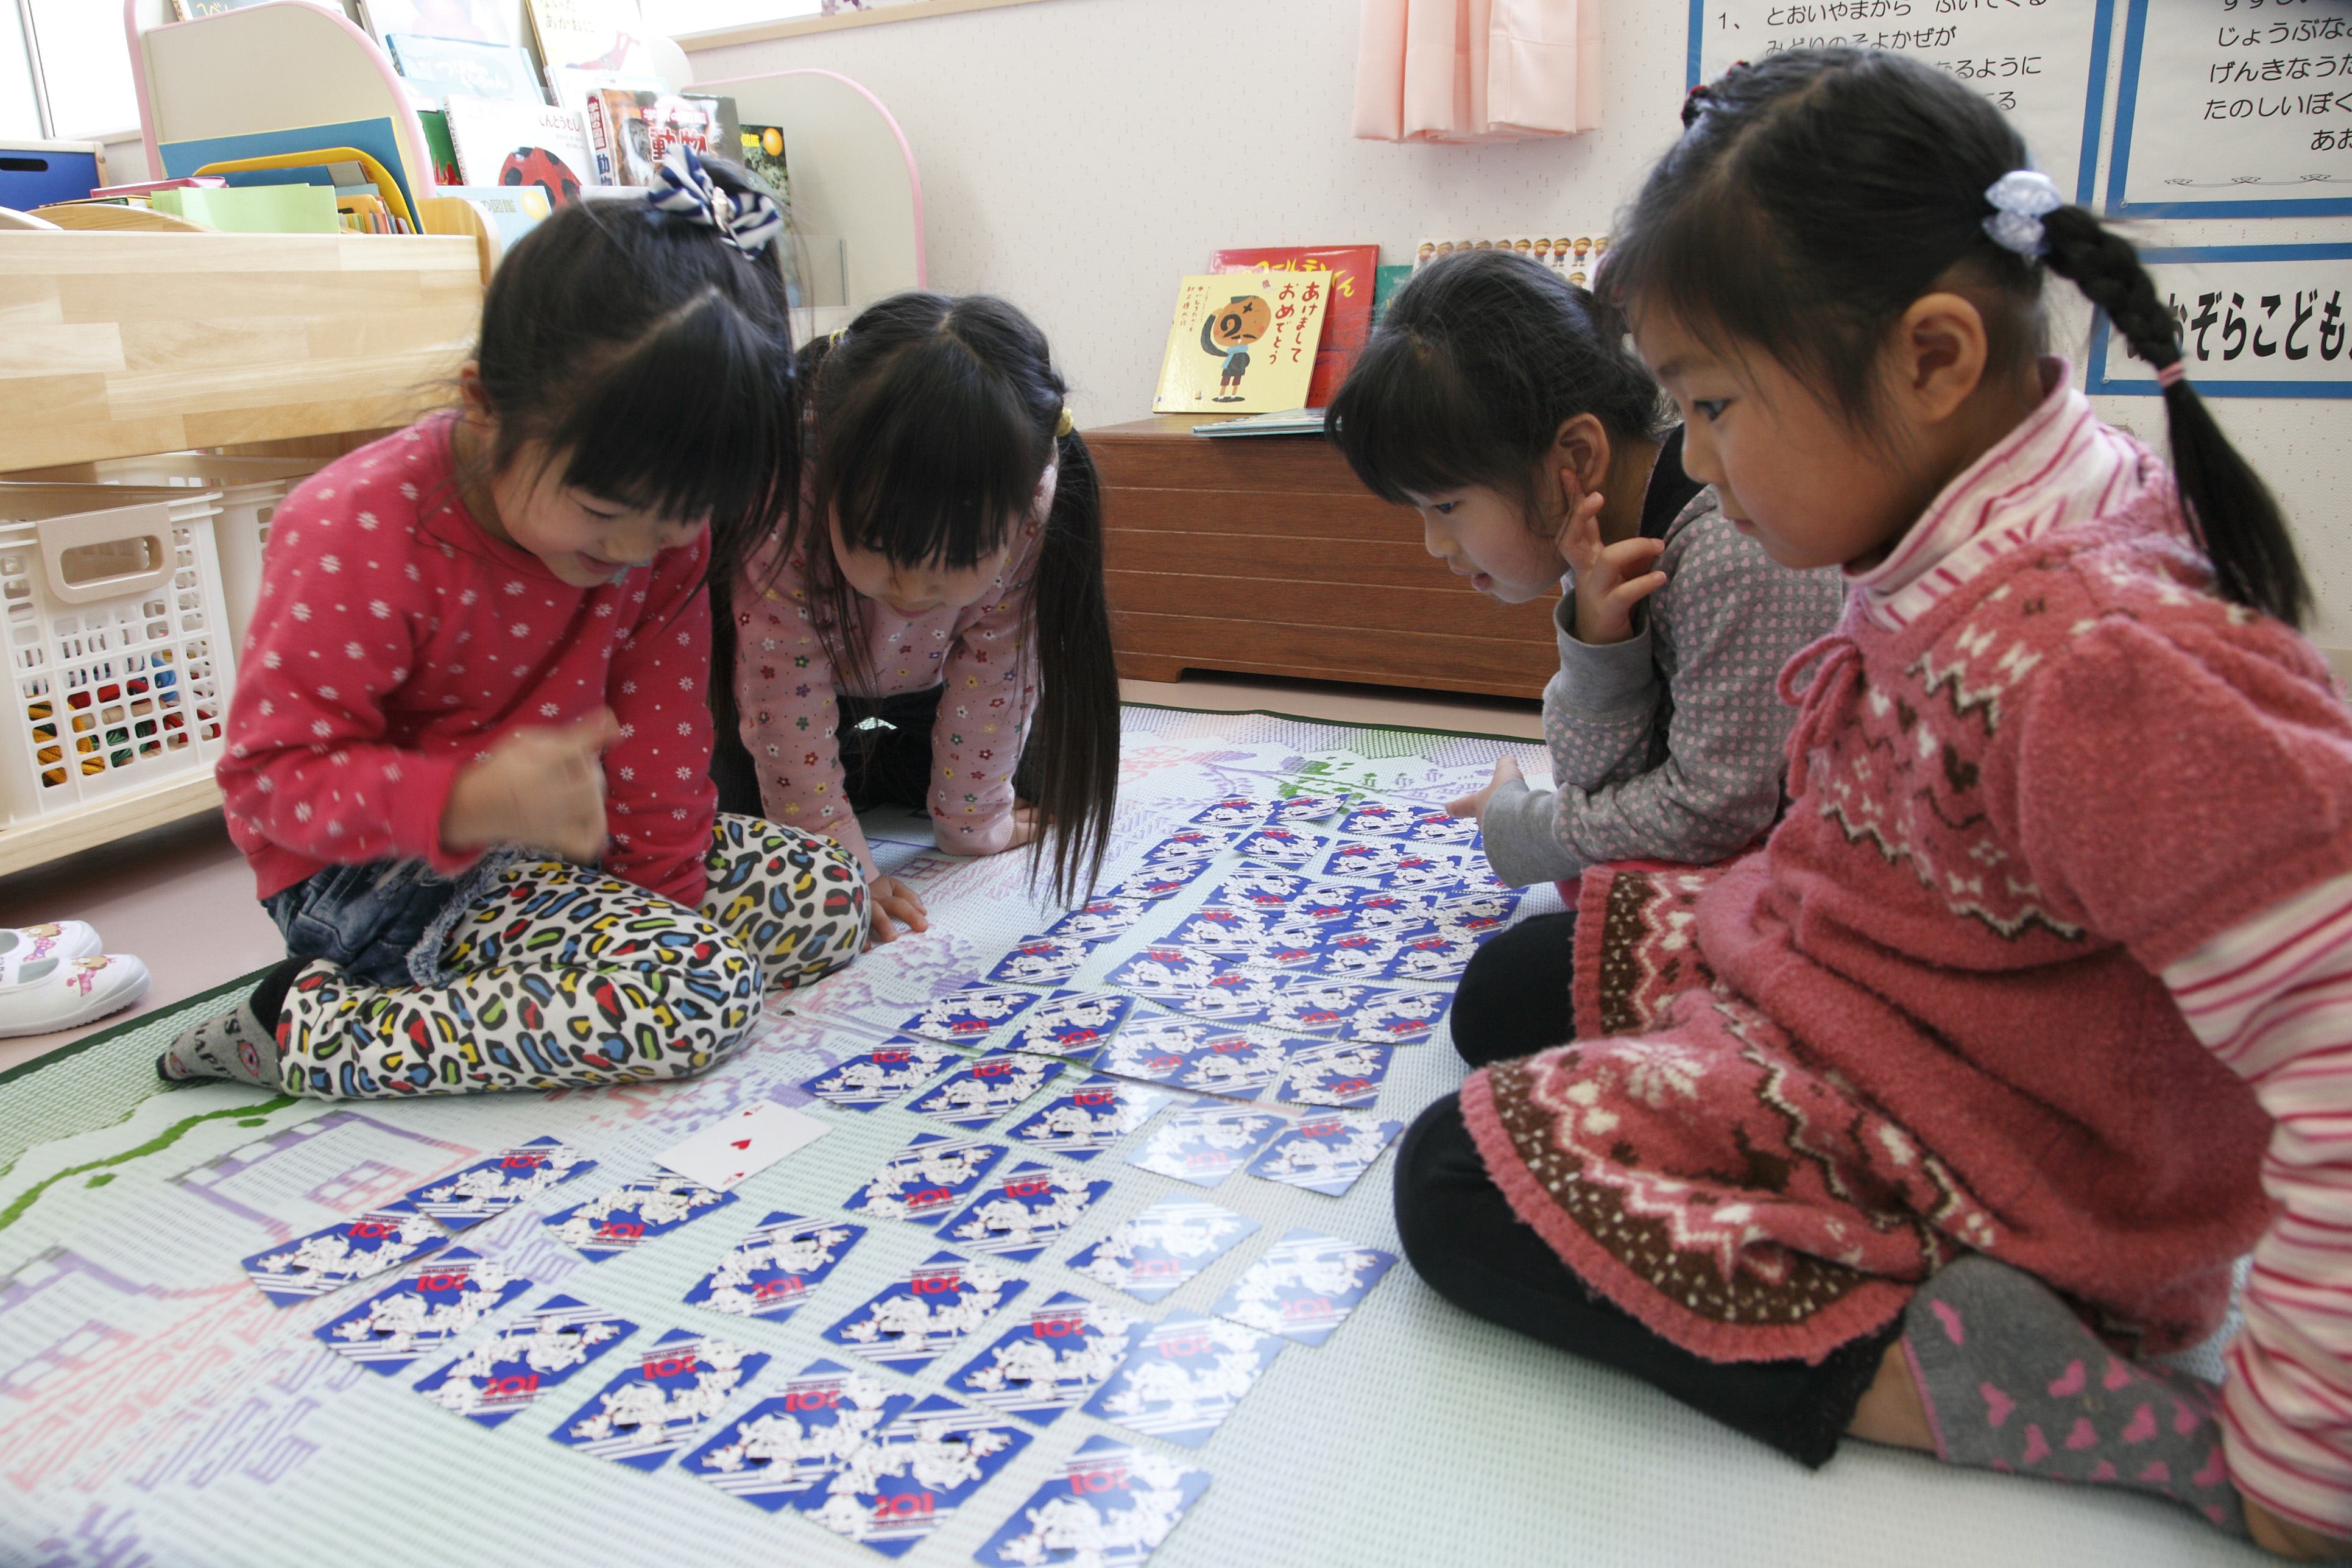 Children unable to return to their homes due to high radiation levels play in the temporary kindergarten supported by the Japanese Red Cross.